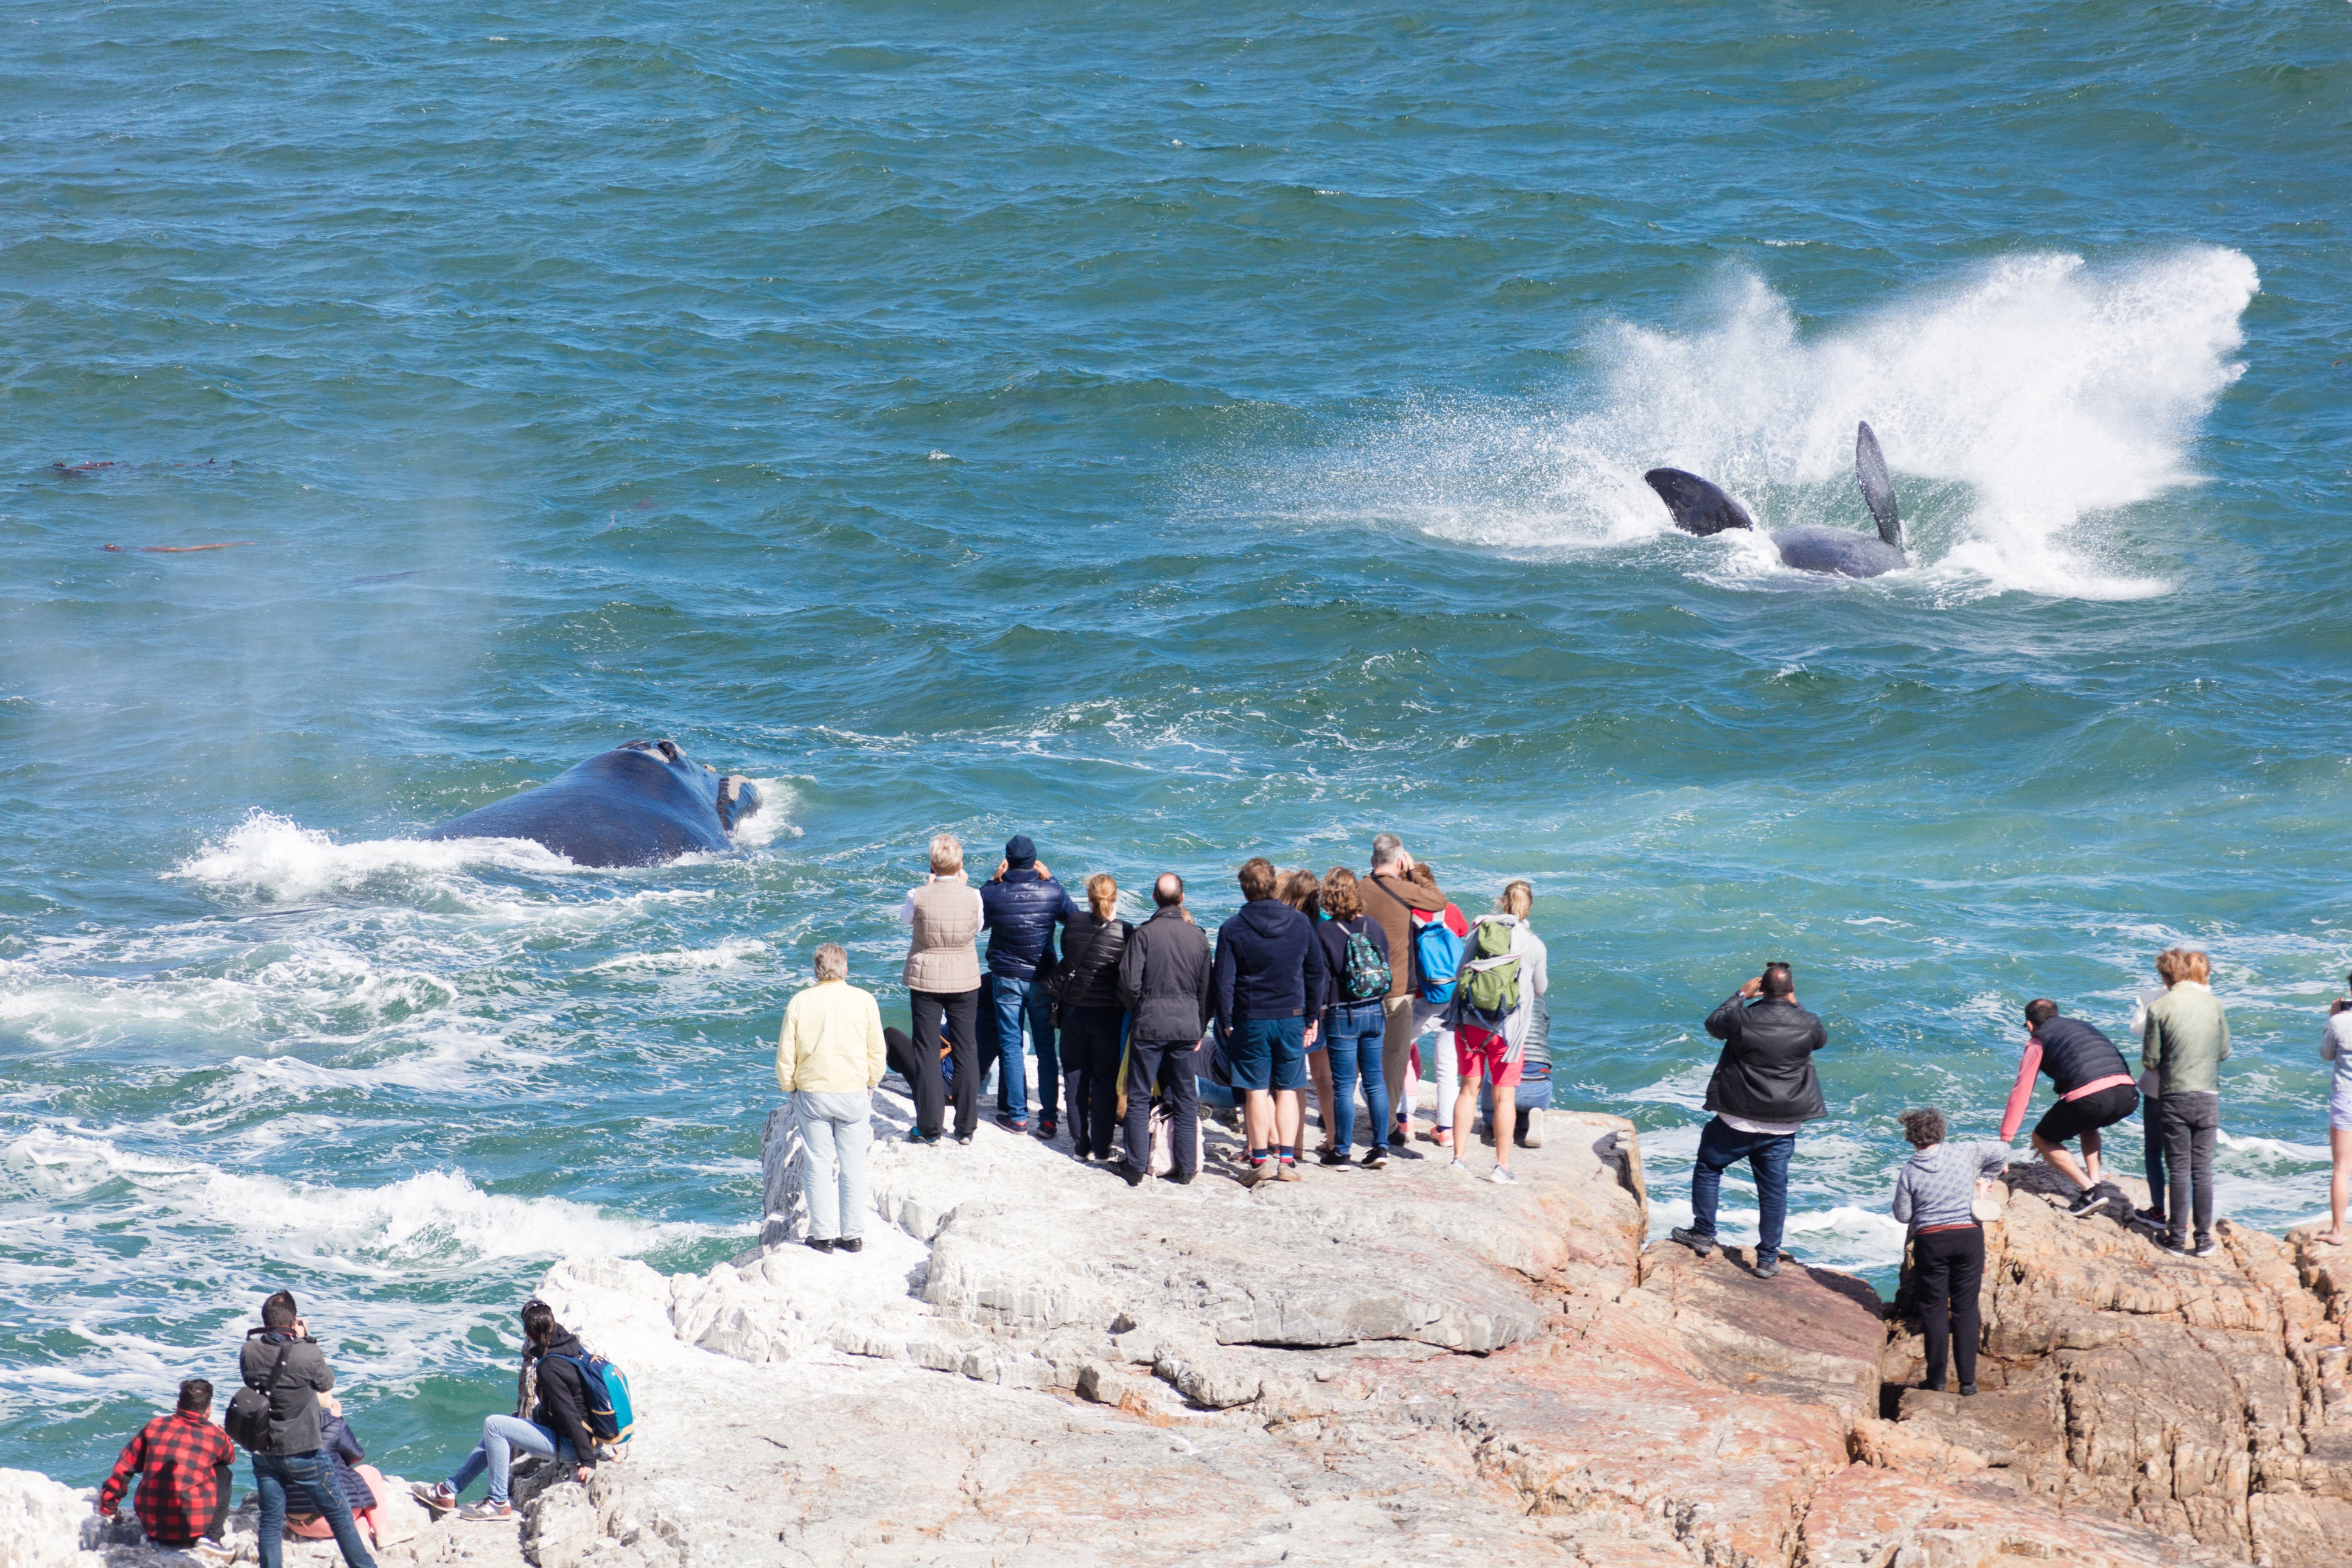 Southern right whales jumping near Hermanus, South Africa